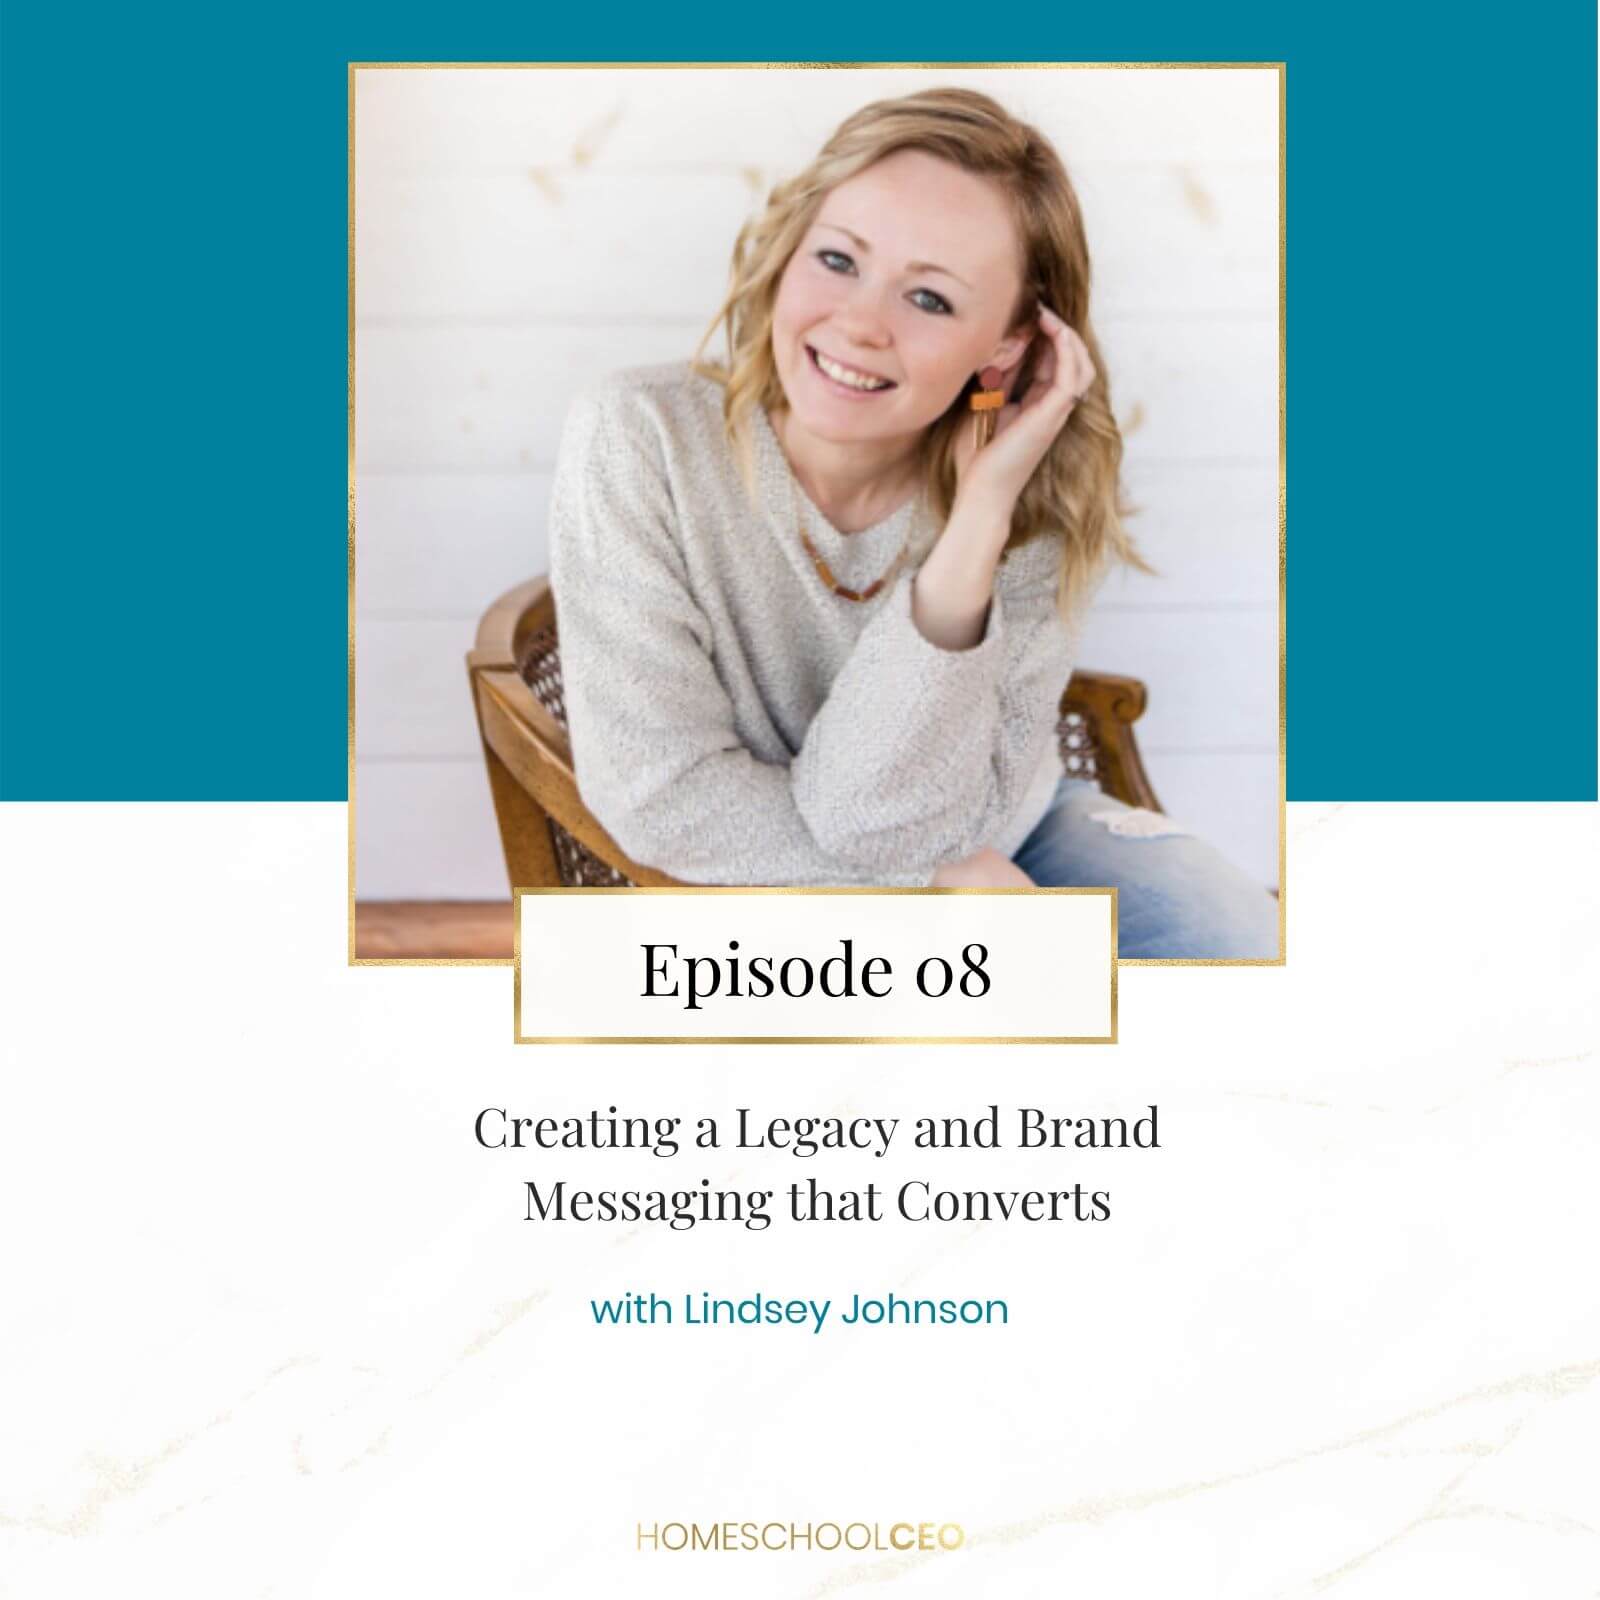 Episode 8 - Creating a Legacy and Brand Messaging that Converts